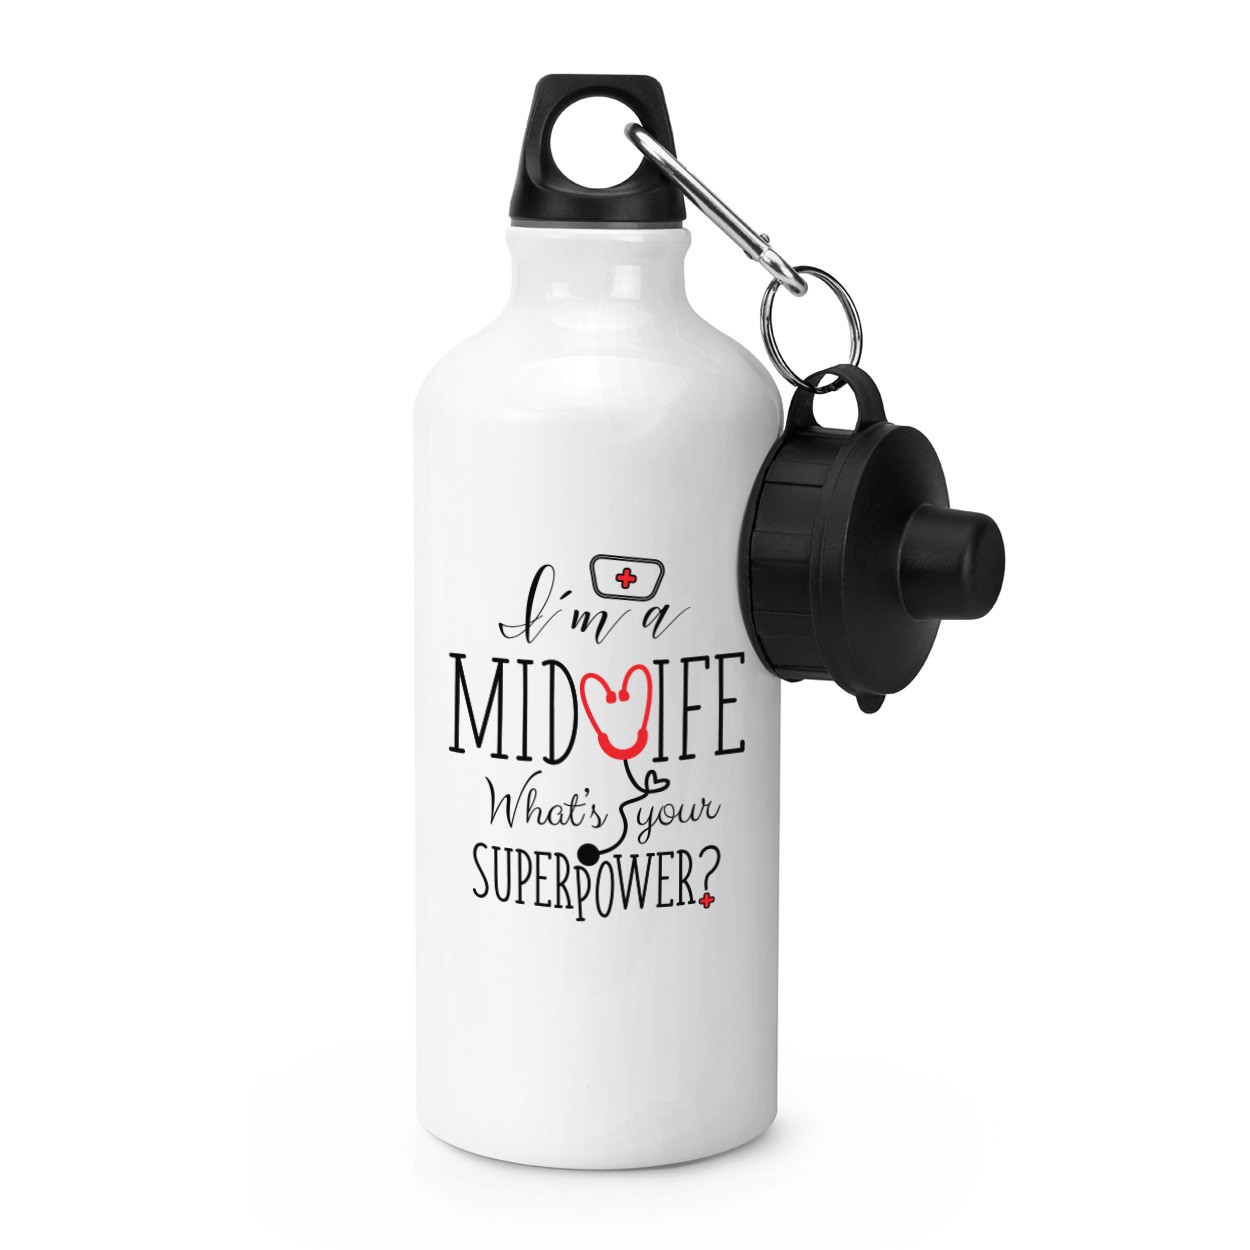 I'm A Midwife What's Your Superpower Sports Bottle